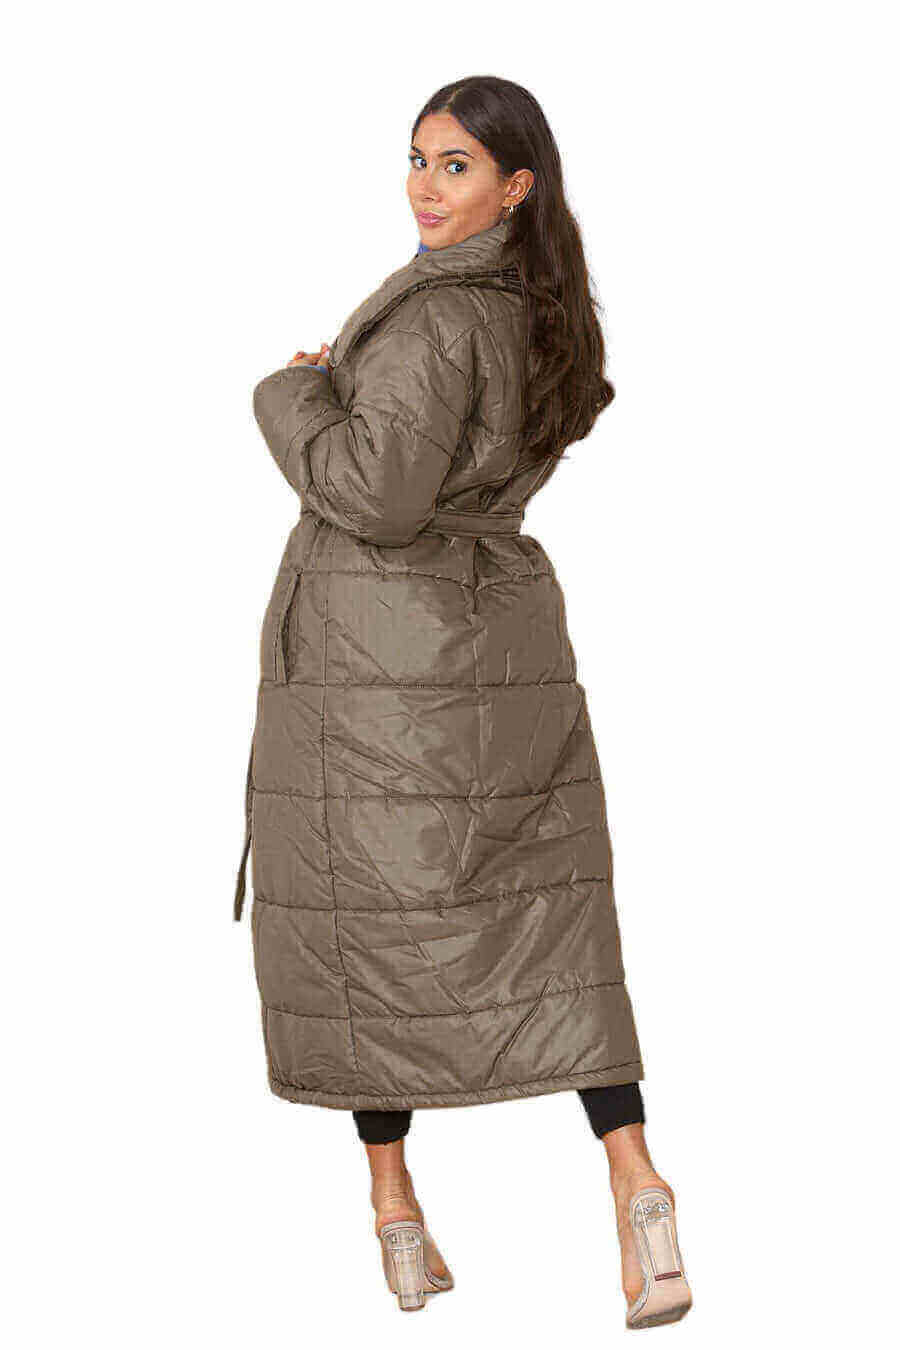 Back View of Chic Long Olive Puffer Coat for Womens